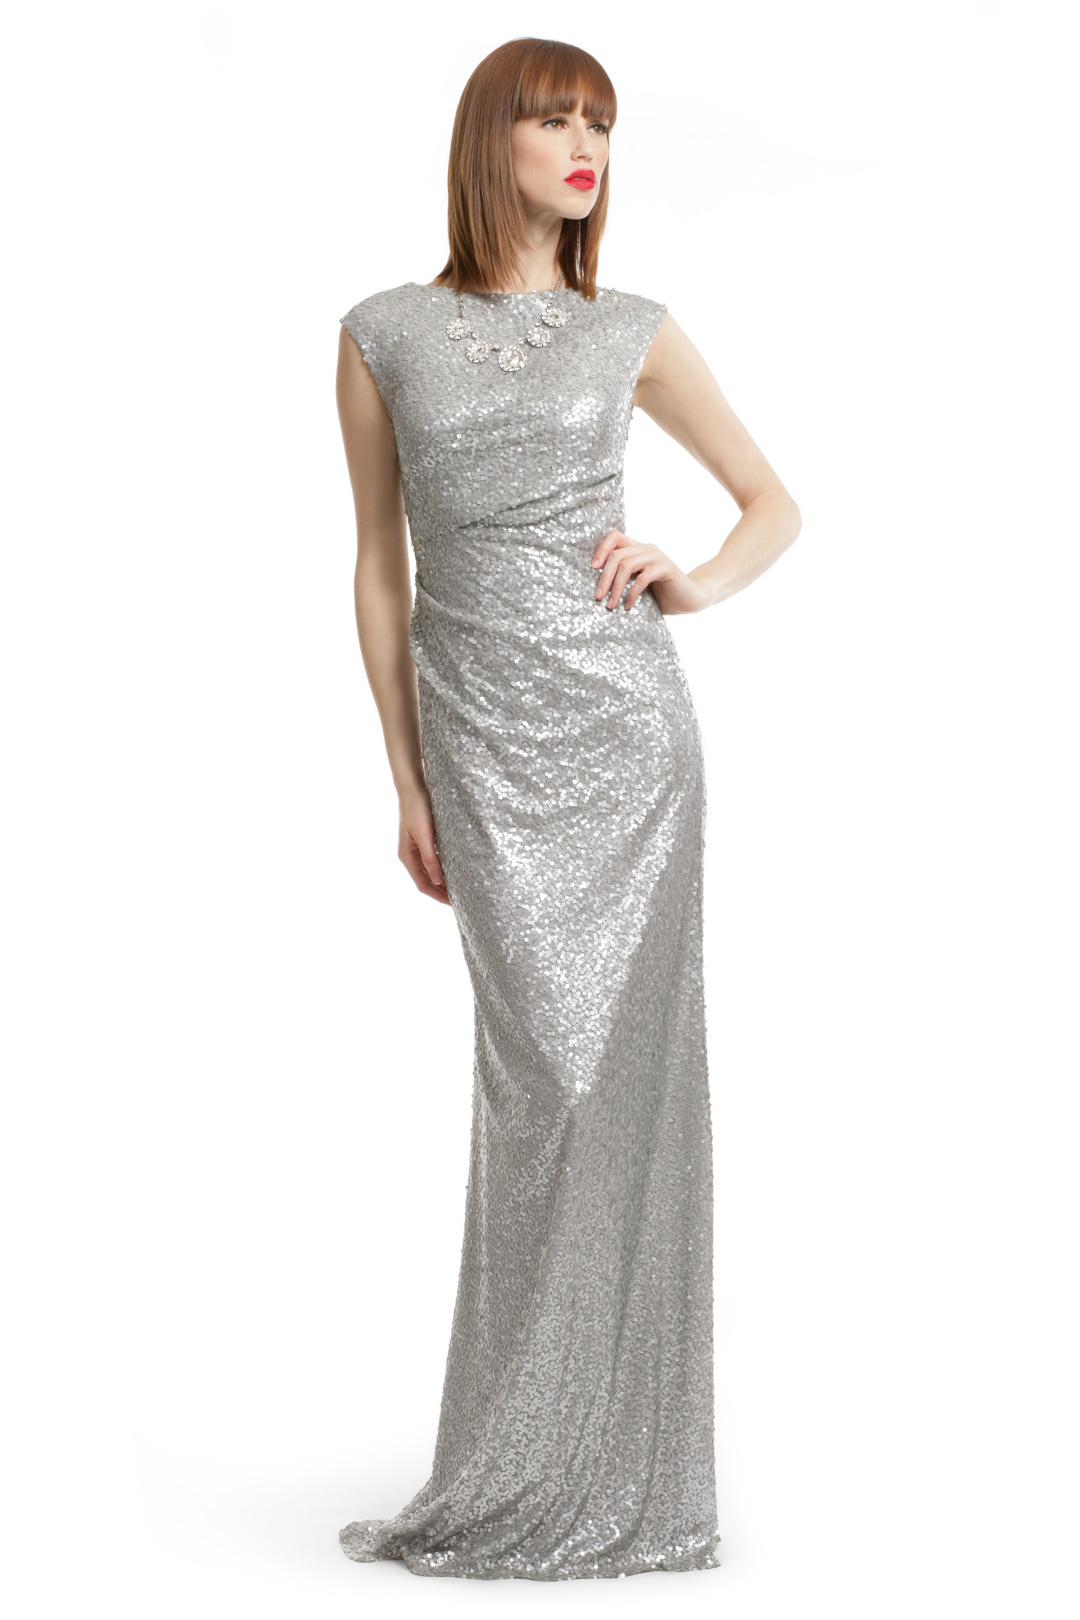 silver sequin dress silver sequin shine gown by david meister for $49 | rent the runway XDOOXBI